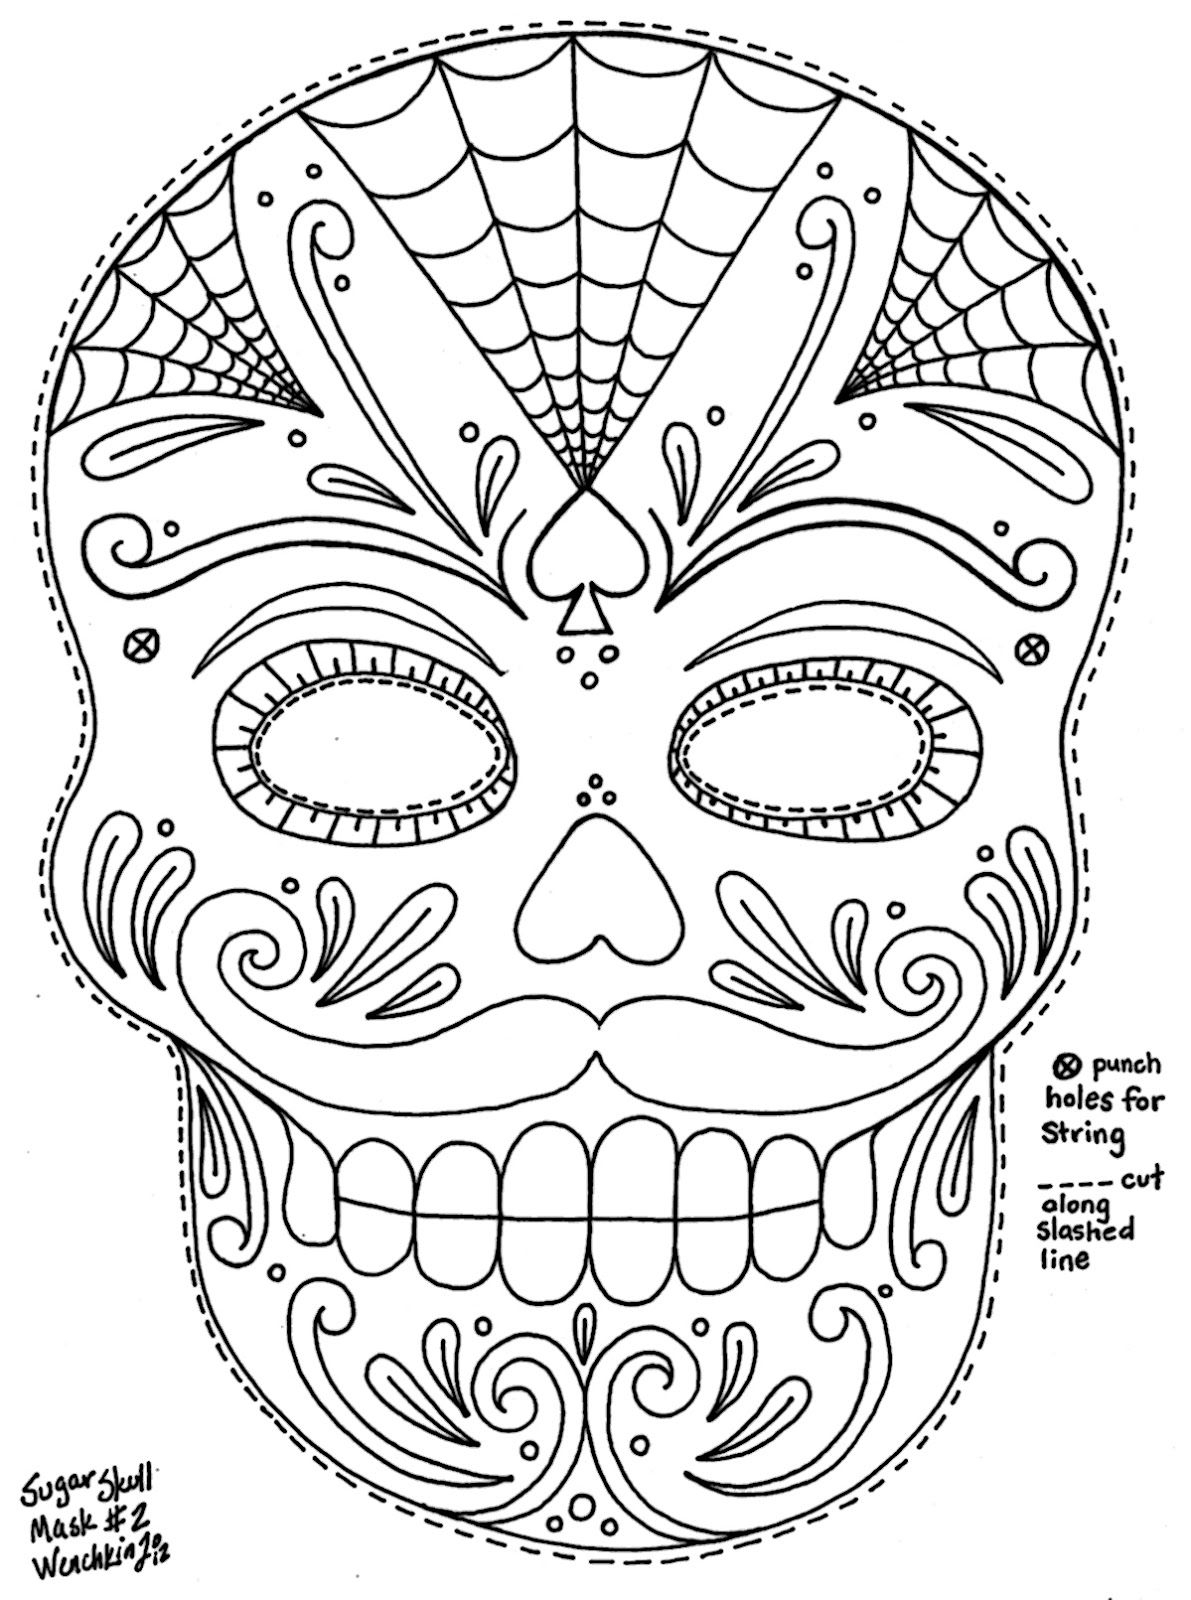 Wenchkin s Coloring Pages Moustached Sugar Skull Mask Skull Coloring Pages Coloring Pages Adult Coloring Pages